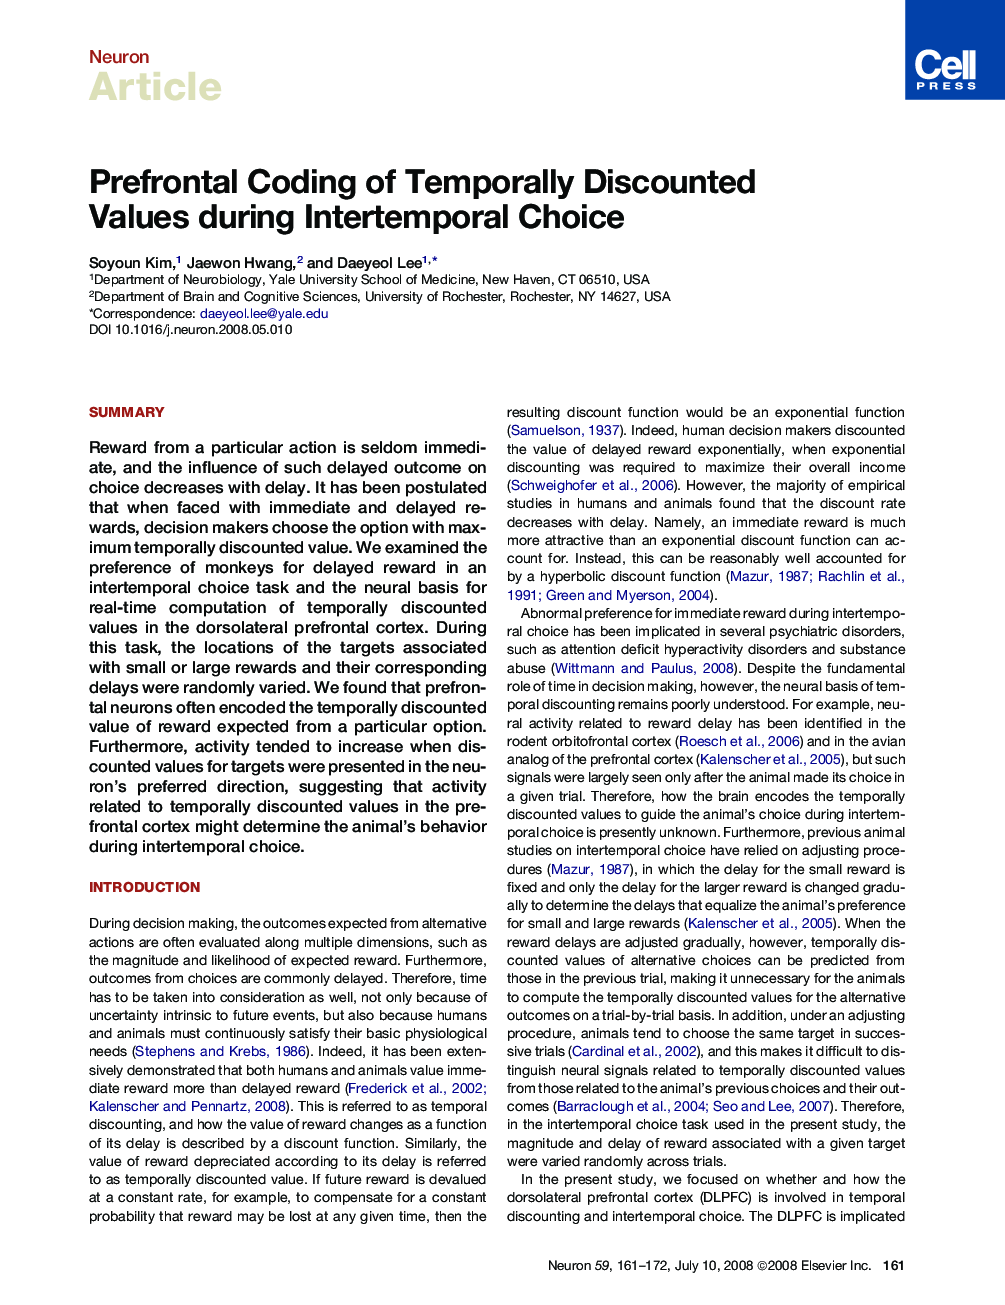 Prefrontal Coding of Temporally Discounted Values during Intertemporal Choice